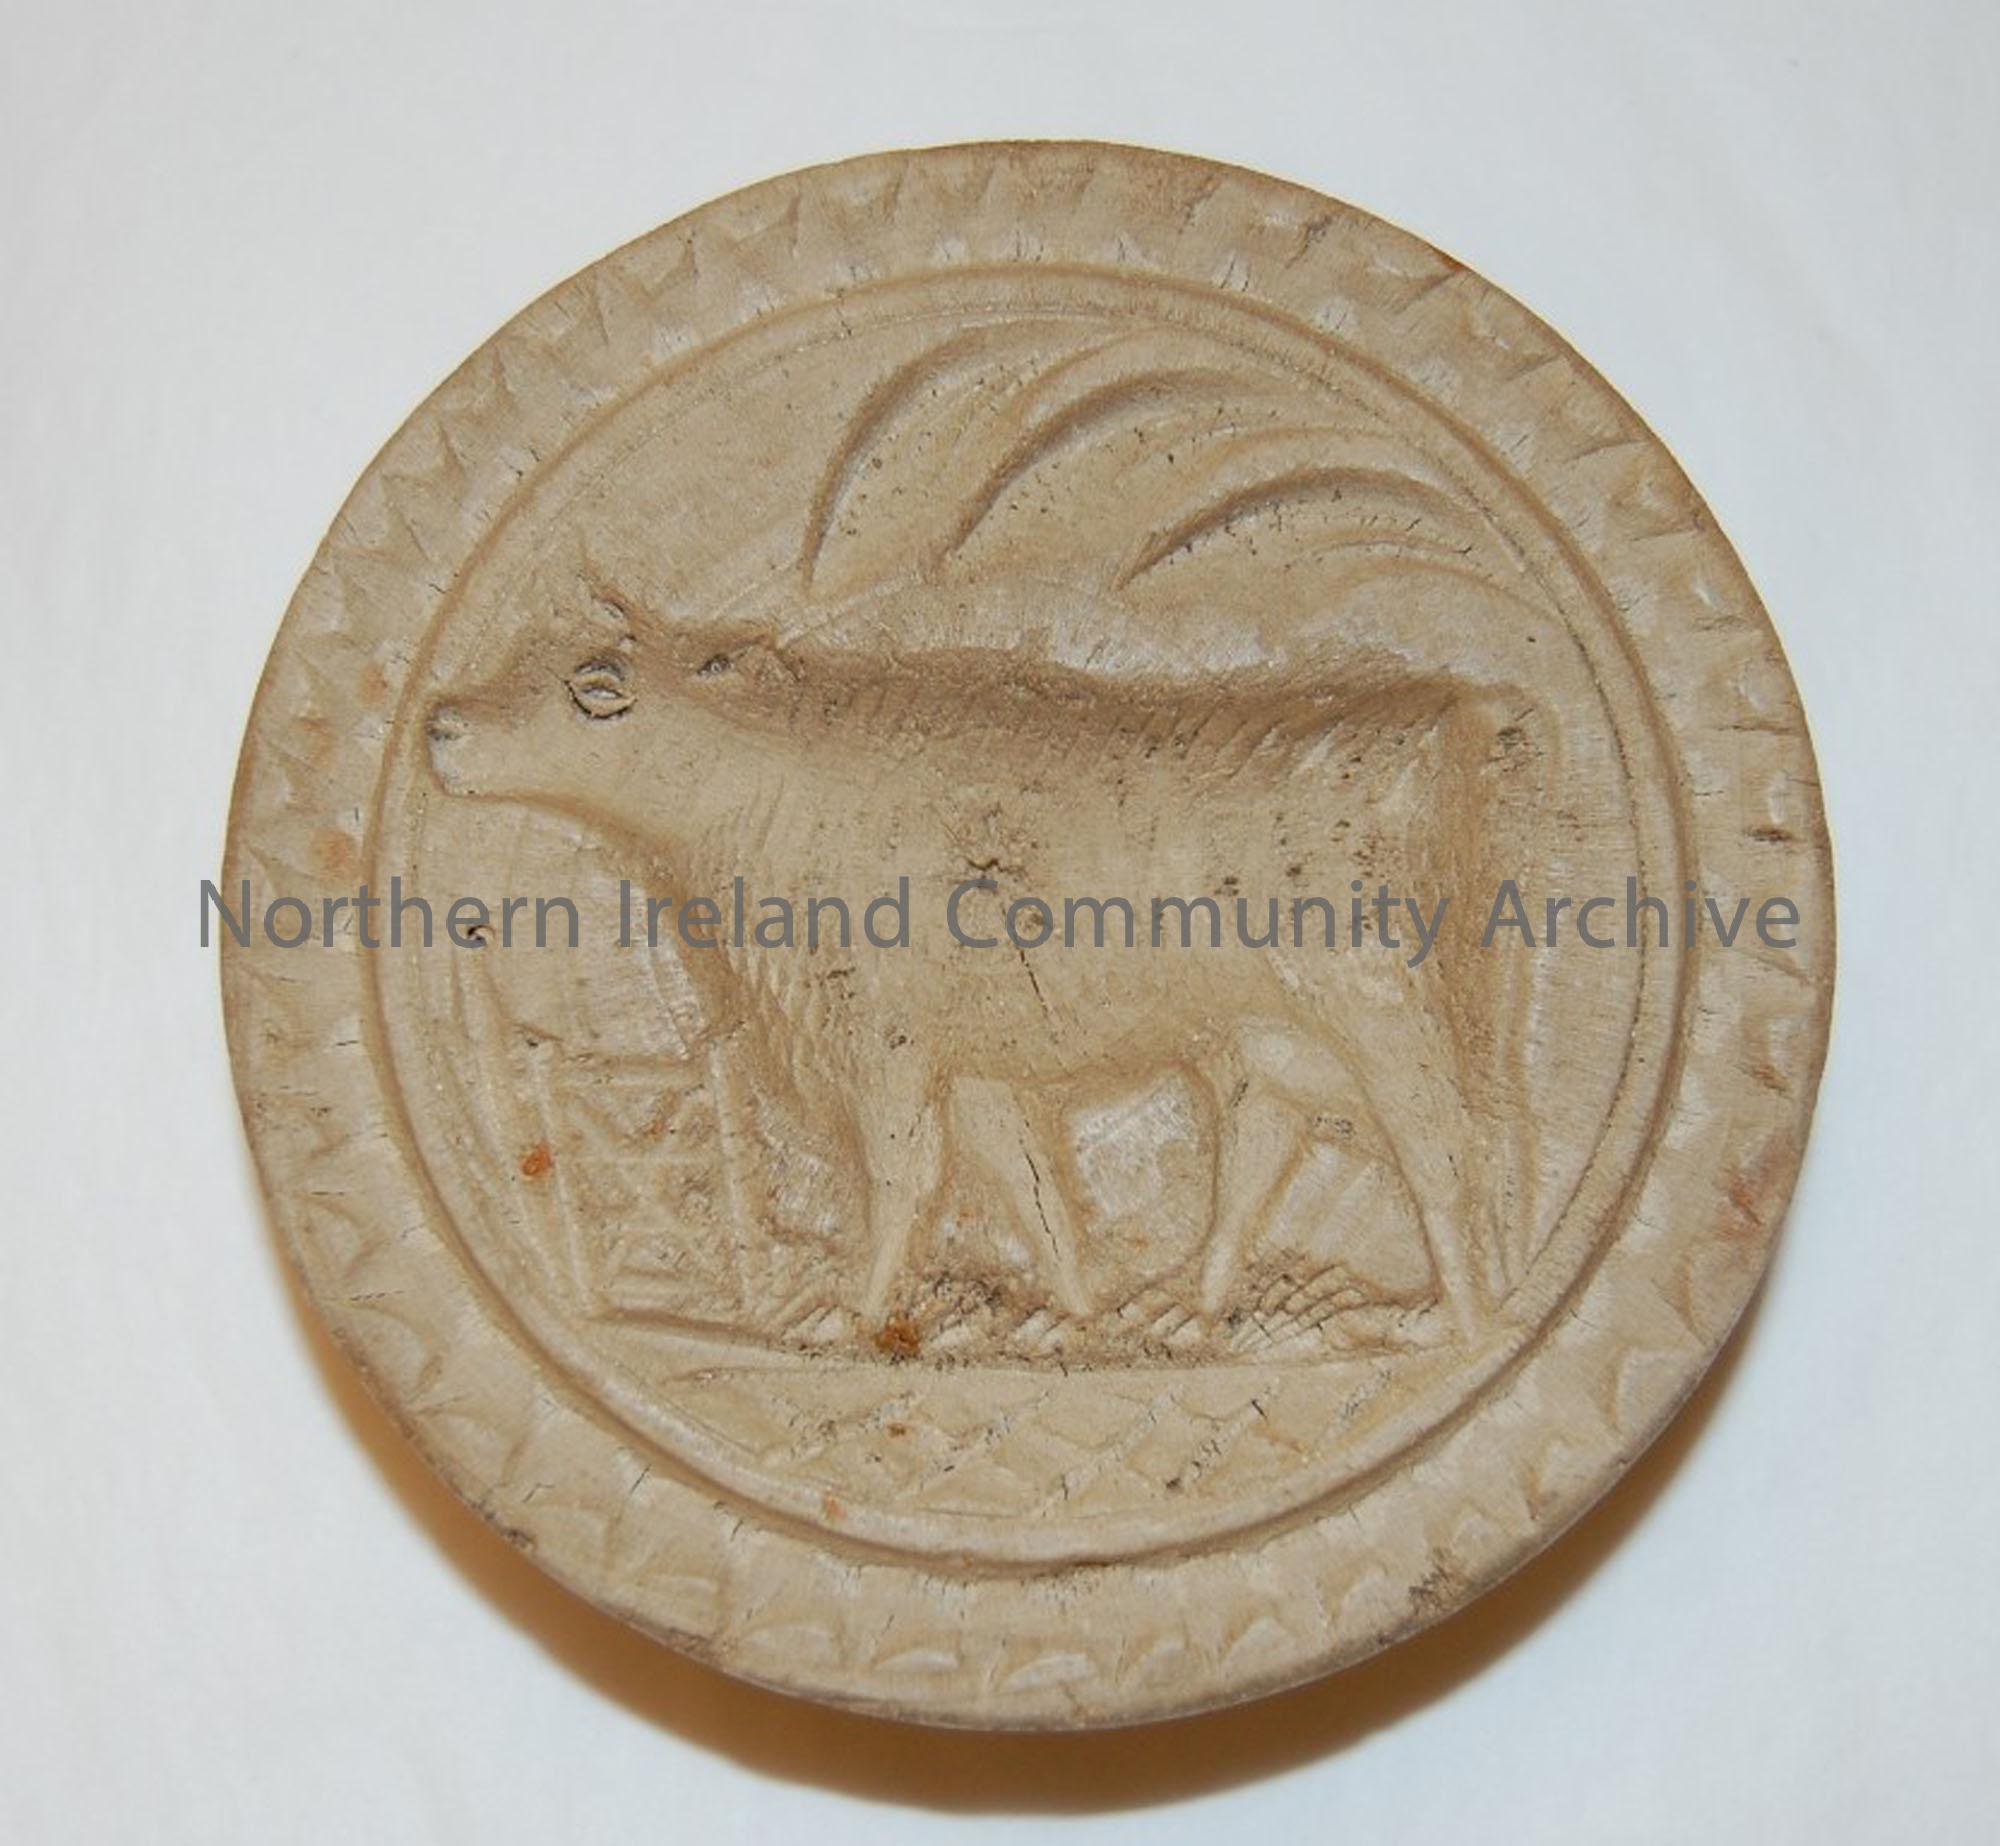 butter stamp imprinted with an image of a cow imprinted, used for pressing butter into shapes